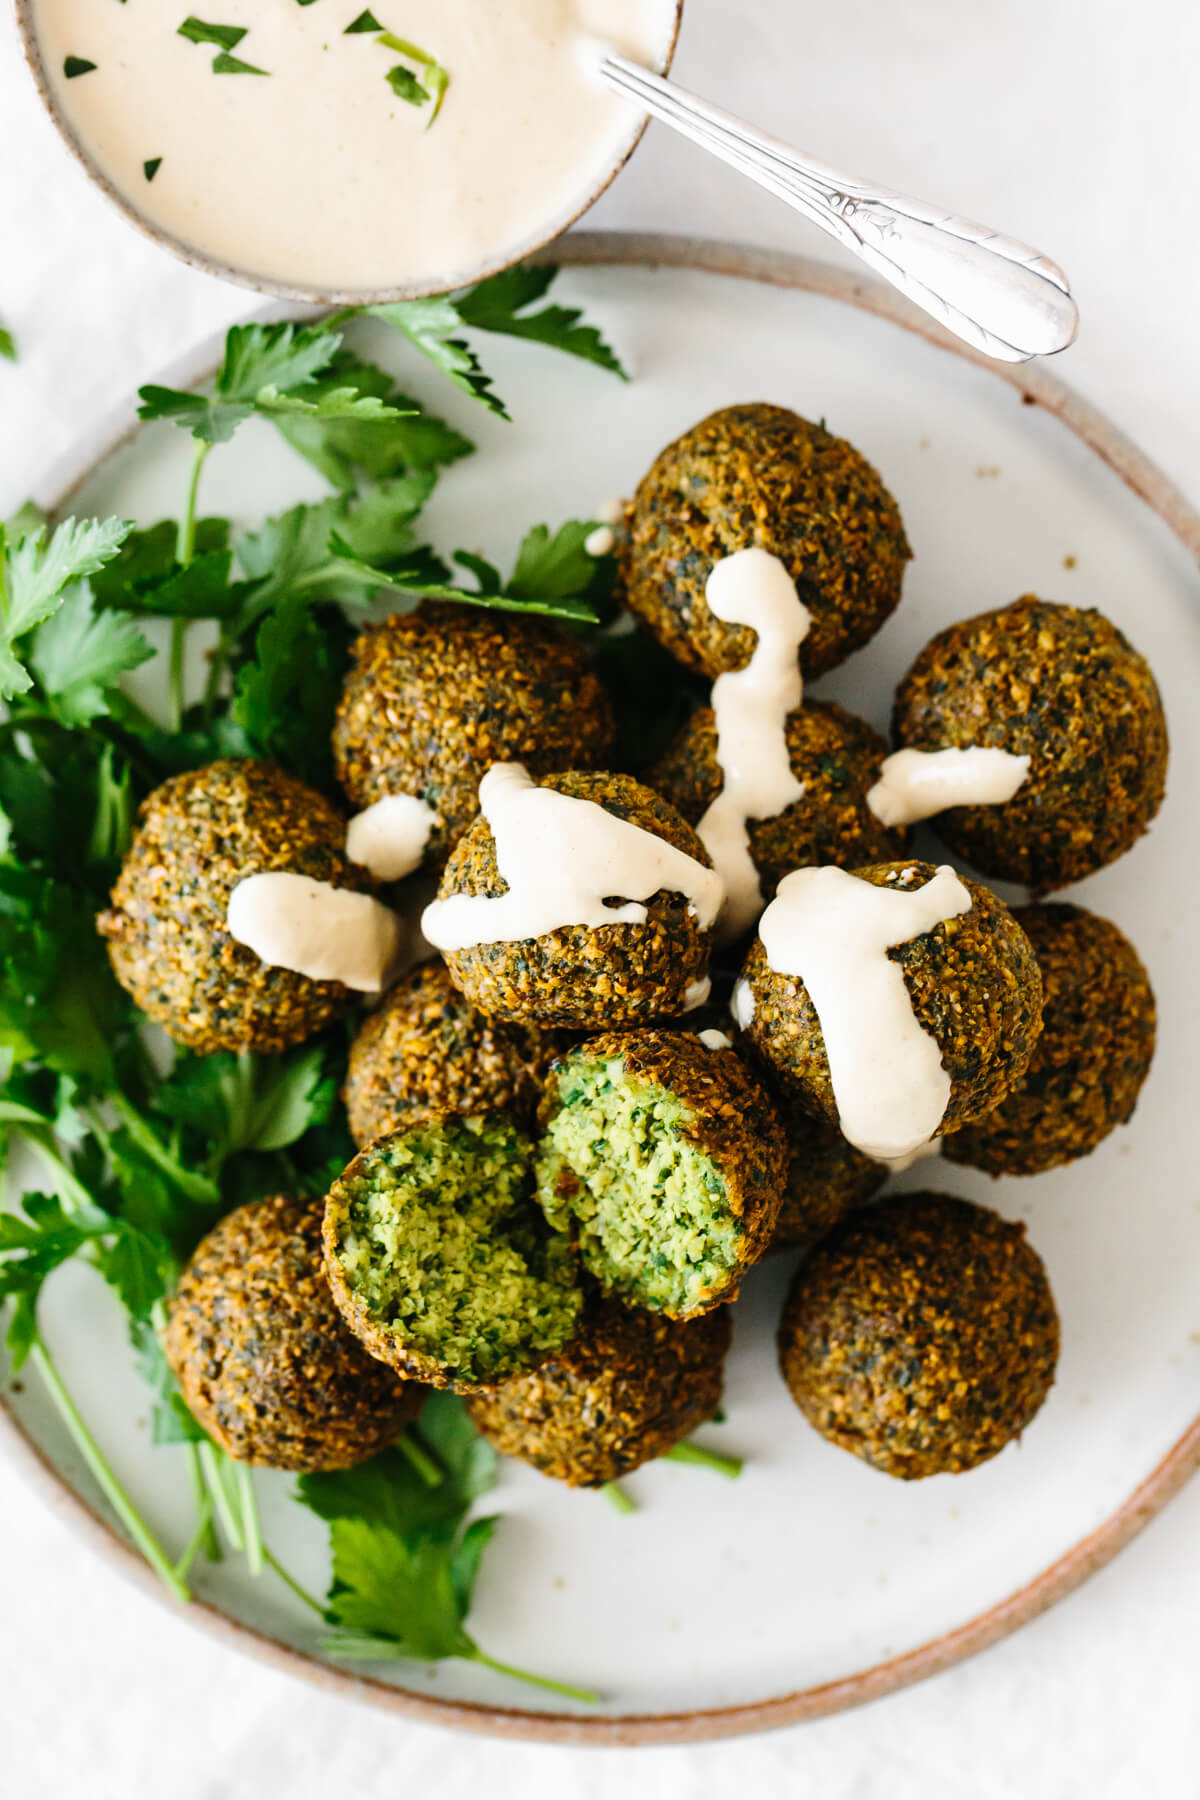 Falafel on a plate with tahini sauce.